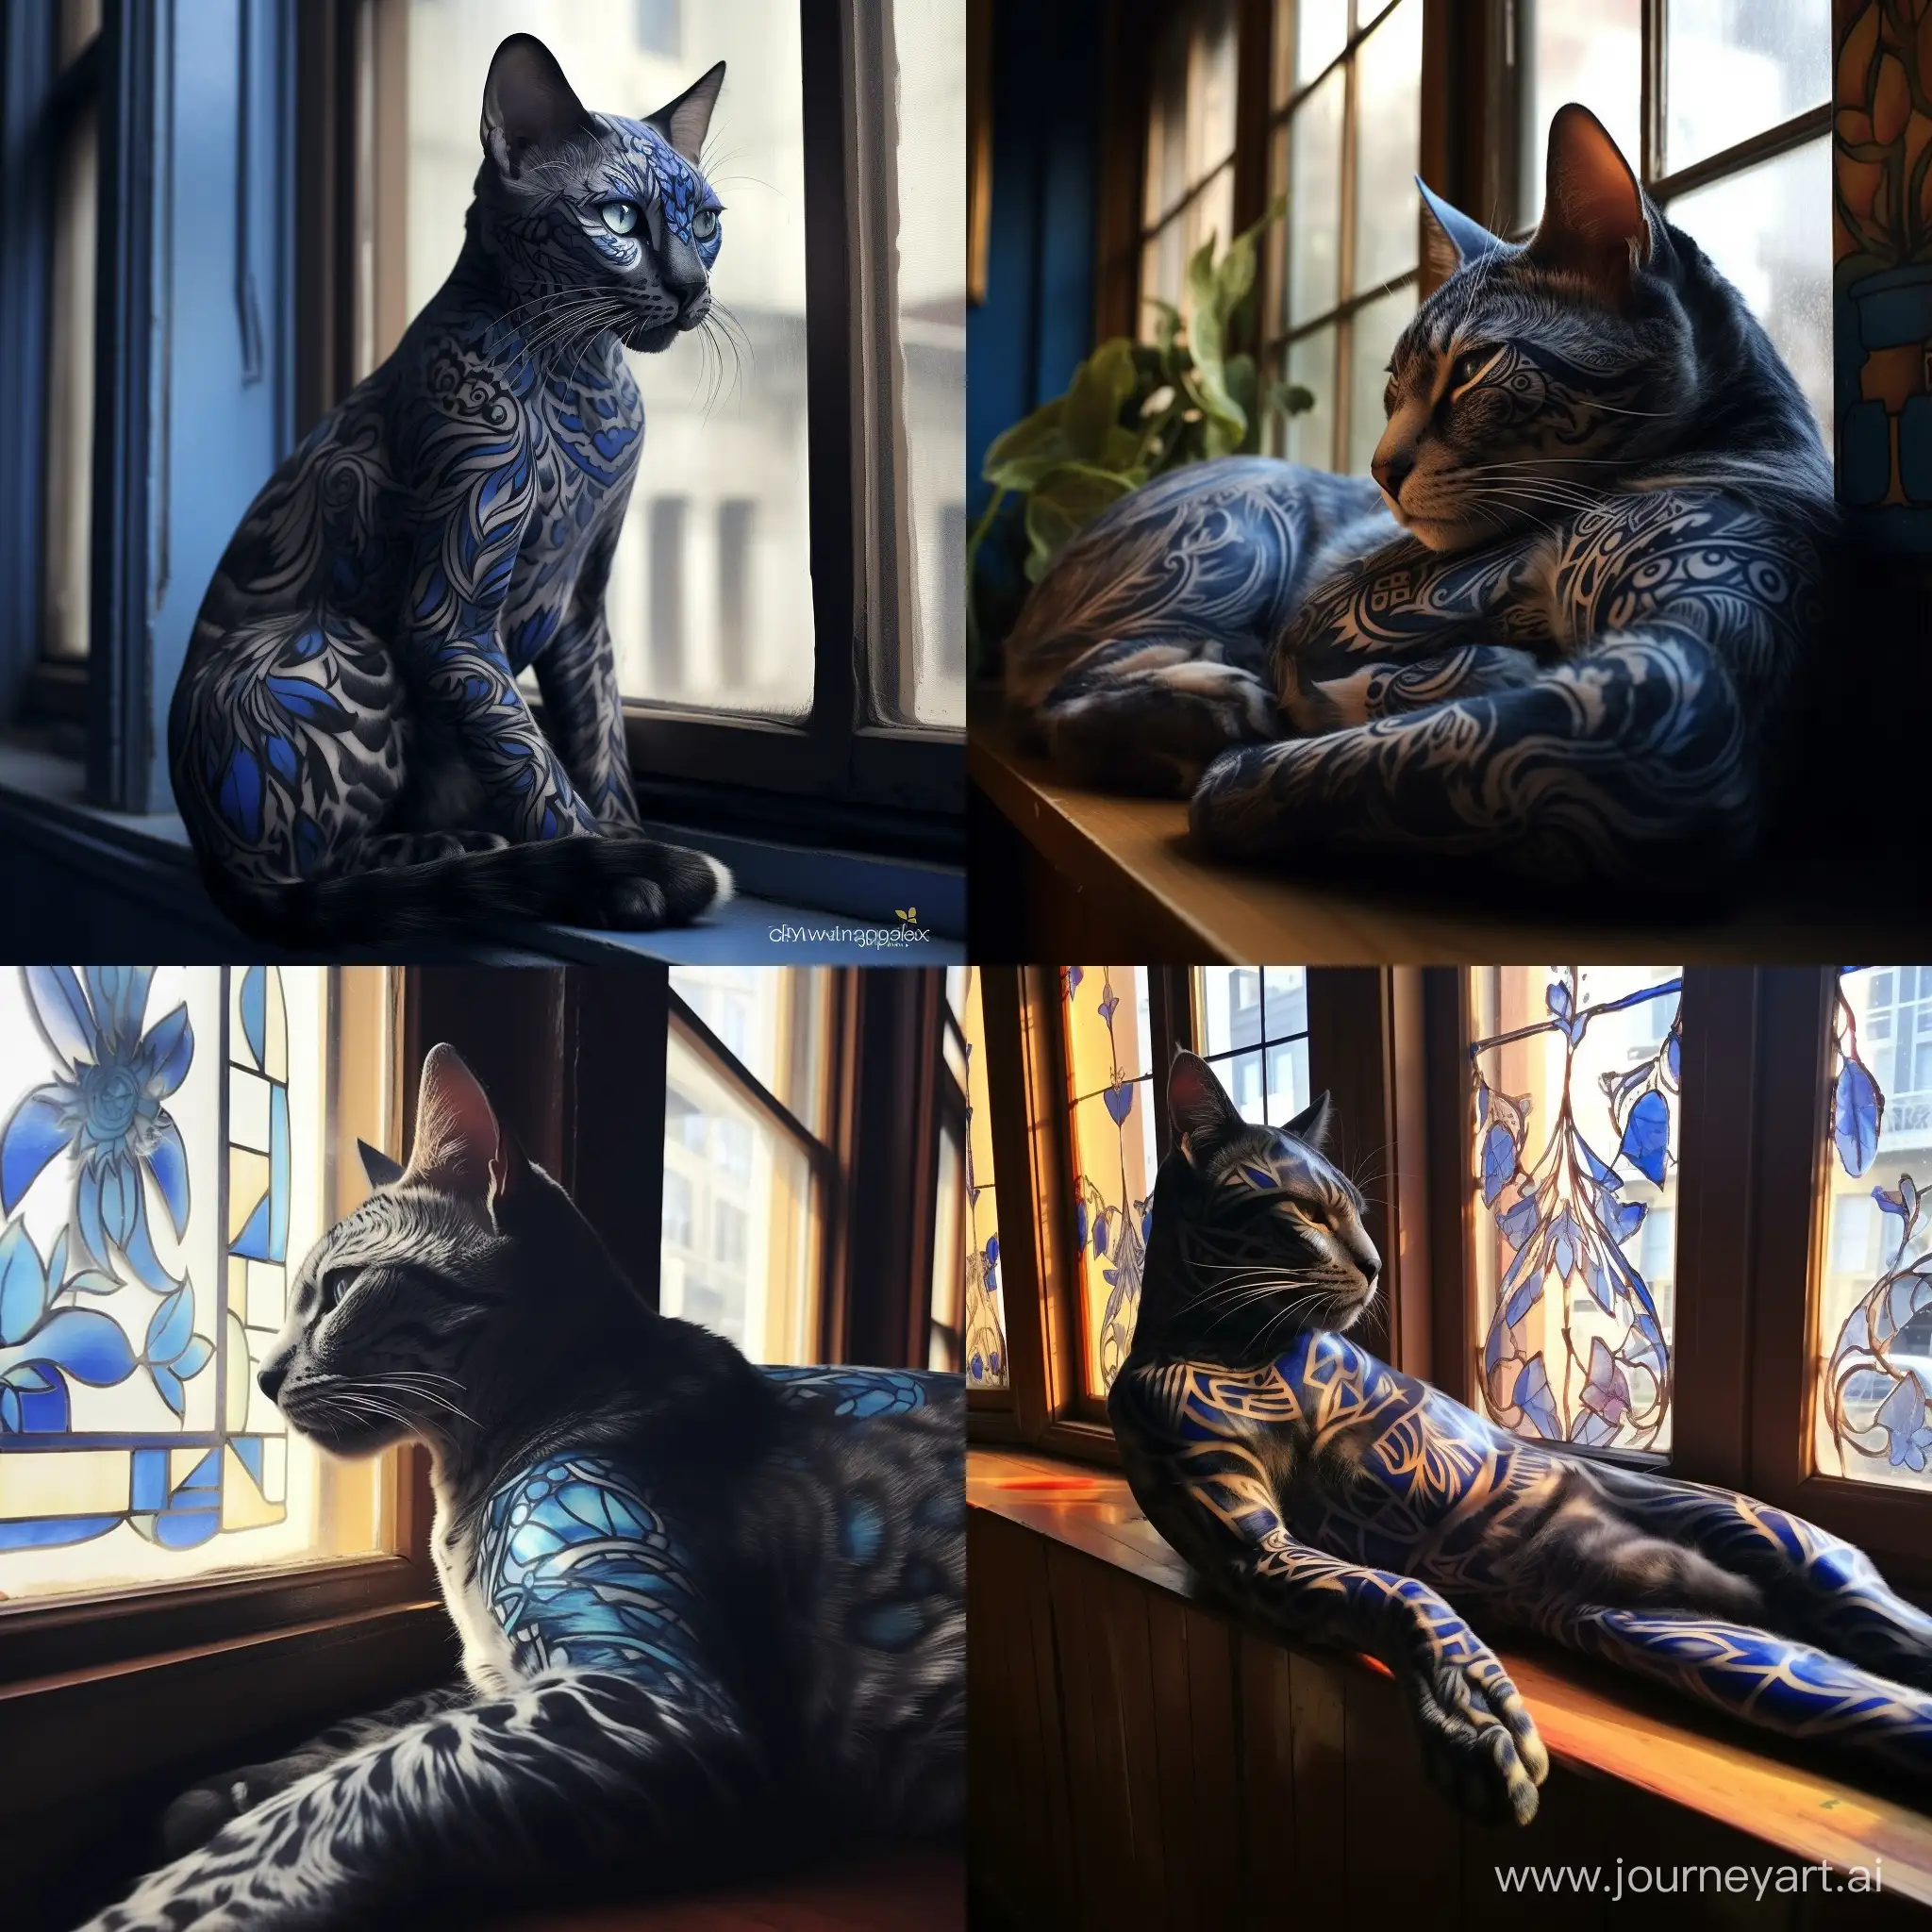 Relaxed-Blue-Cat-with-Intricate-Black-Patterns-Lounging-by-Sunlit-Window